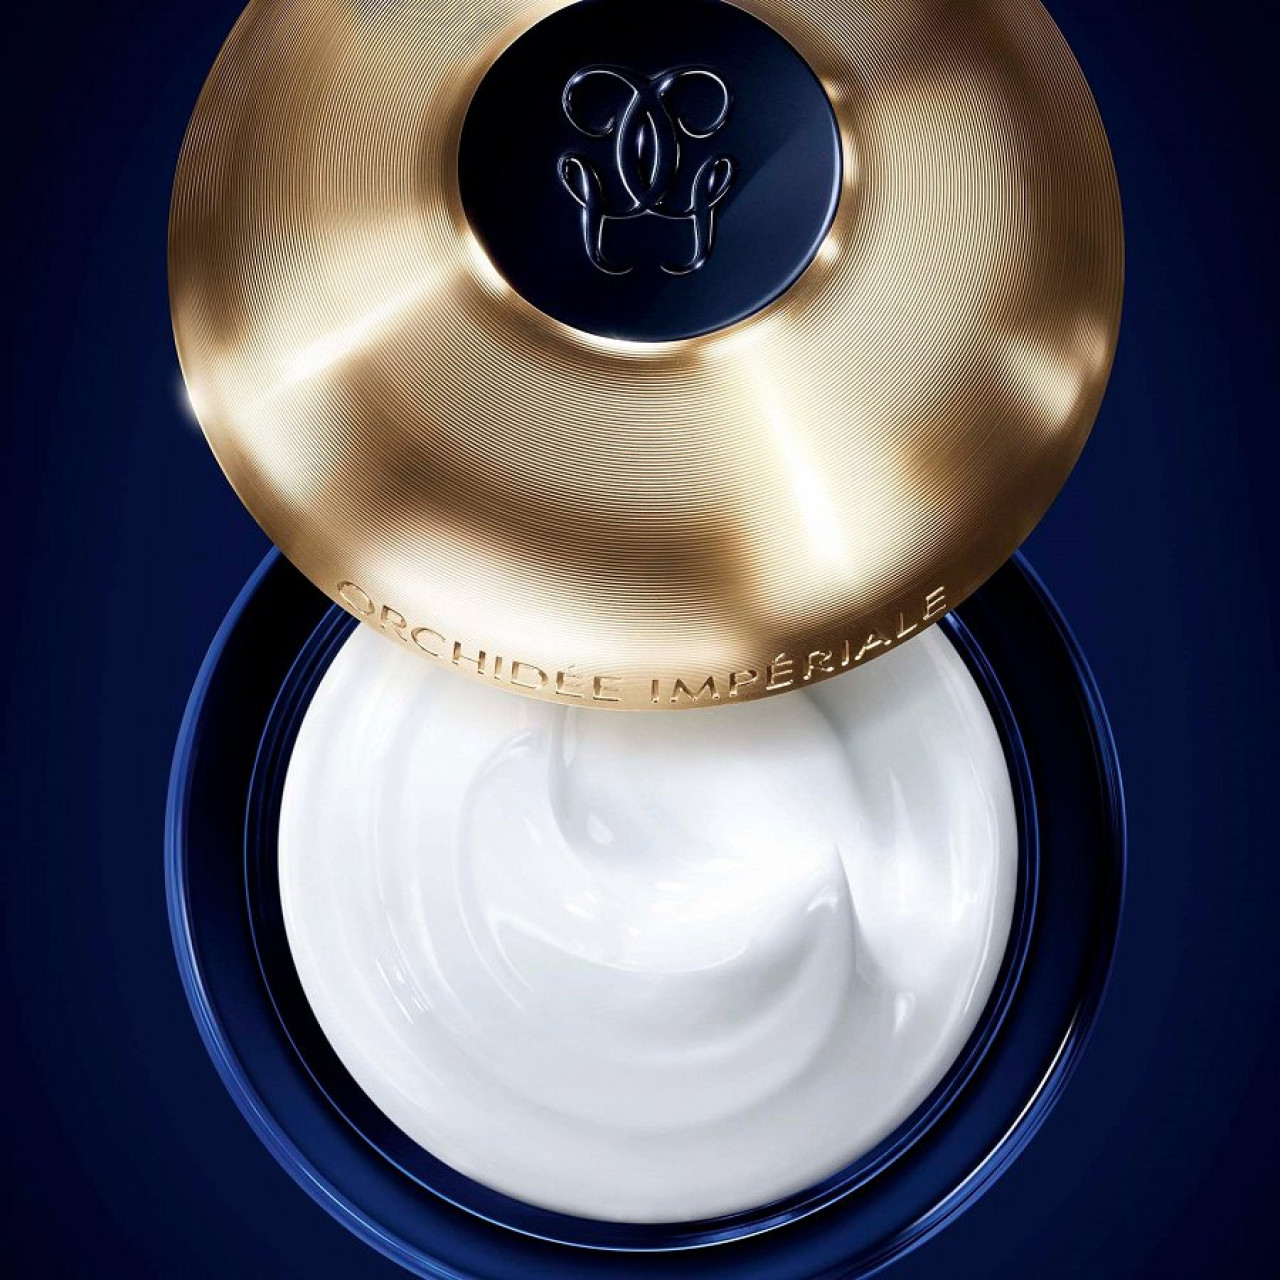 Guerlain orchidee imperiale day cream 50ml